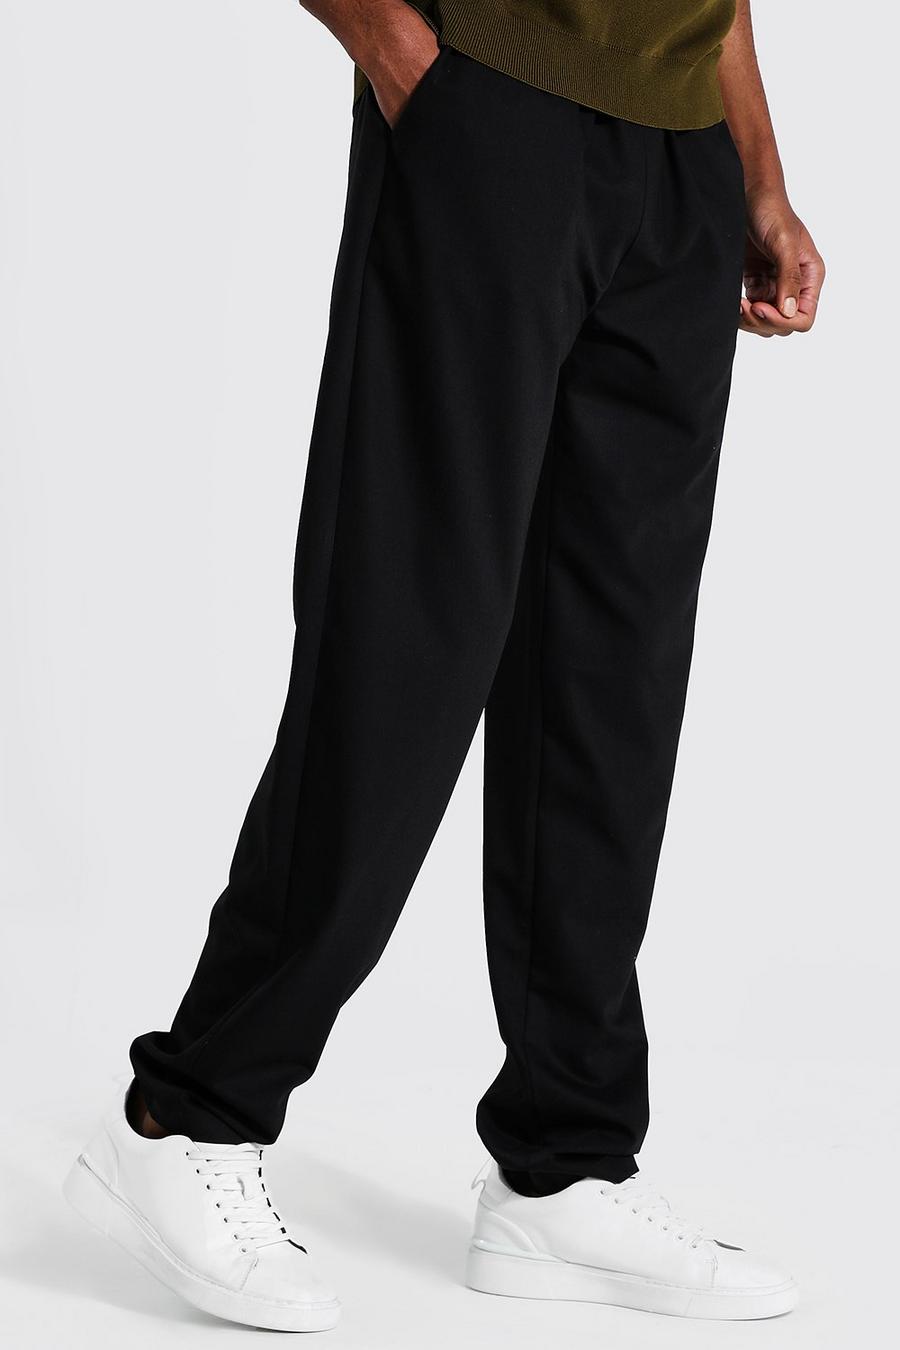 Black Tall Straight Leg Woven Joggers image number 1